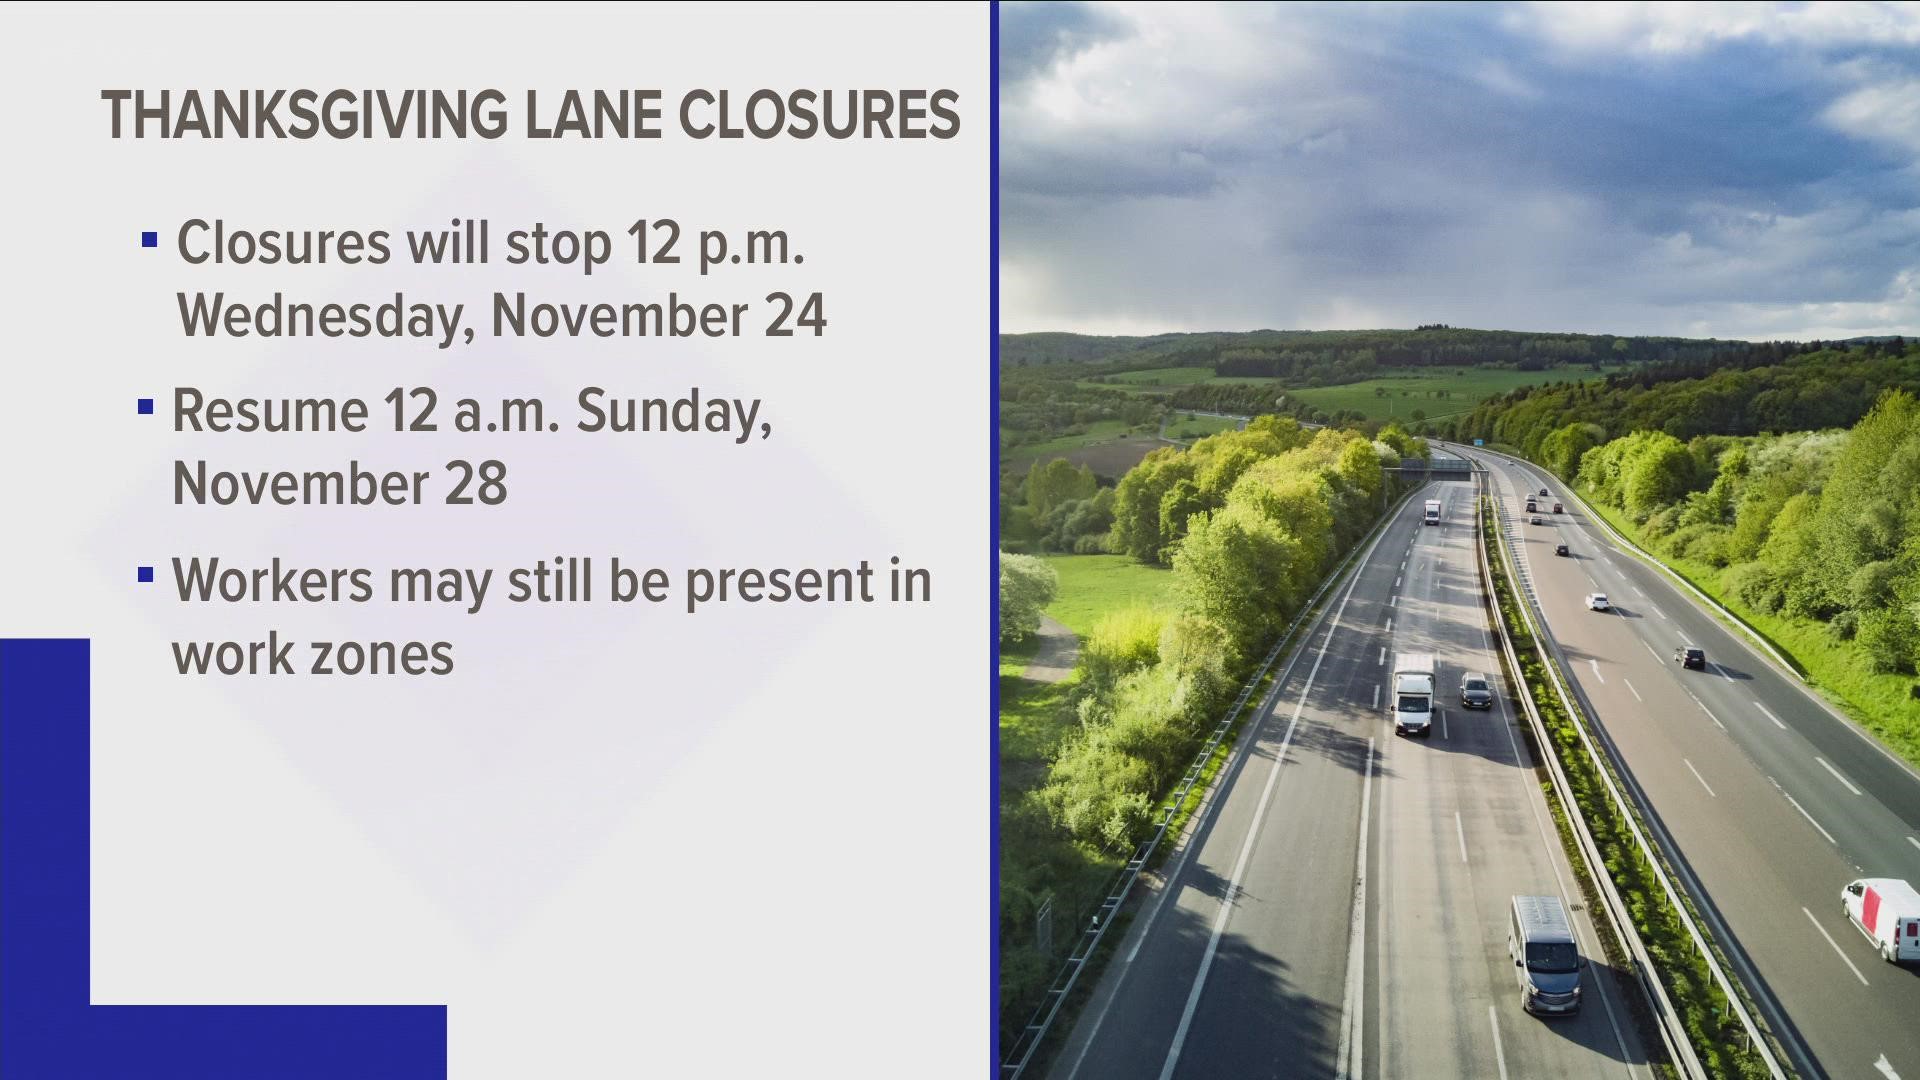 The Tennessee Department of Transportation said they would make sure lanes aren't closed while motorists travel for Thanksgiving, from Nov. 24 through Nov. 28.